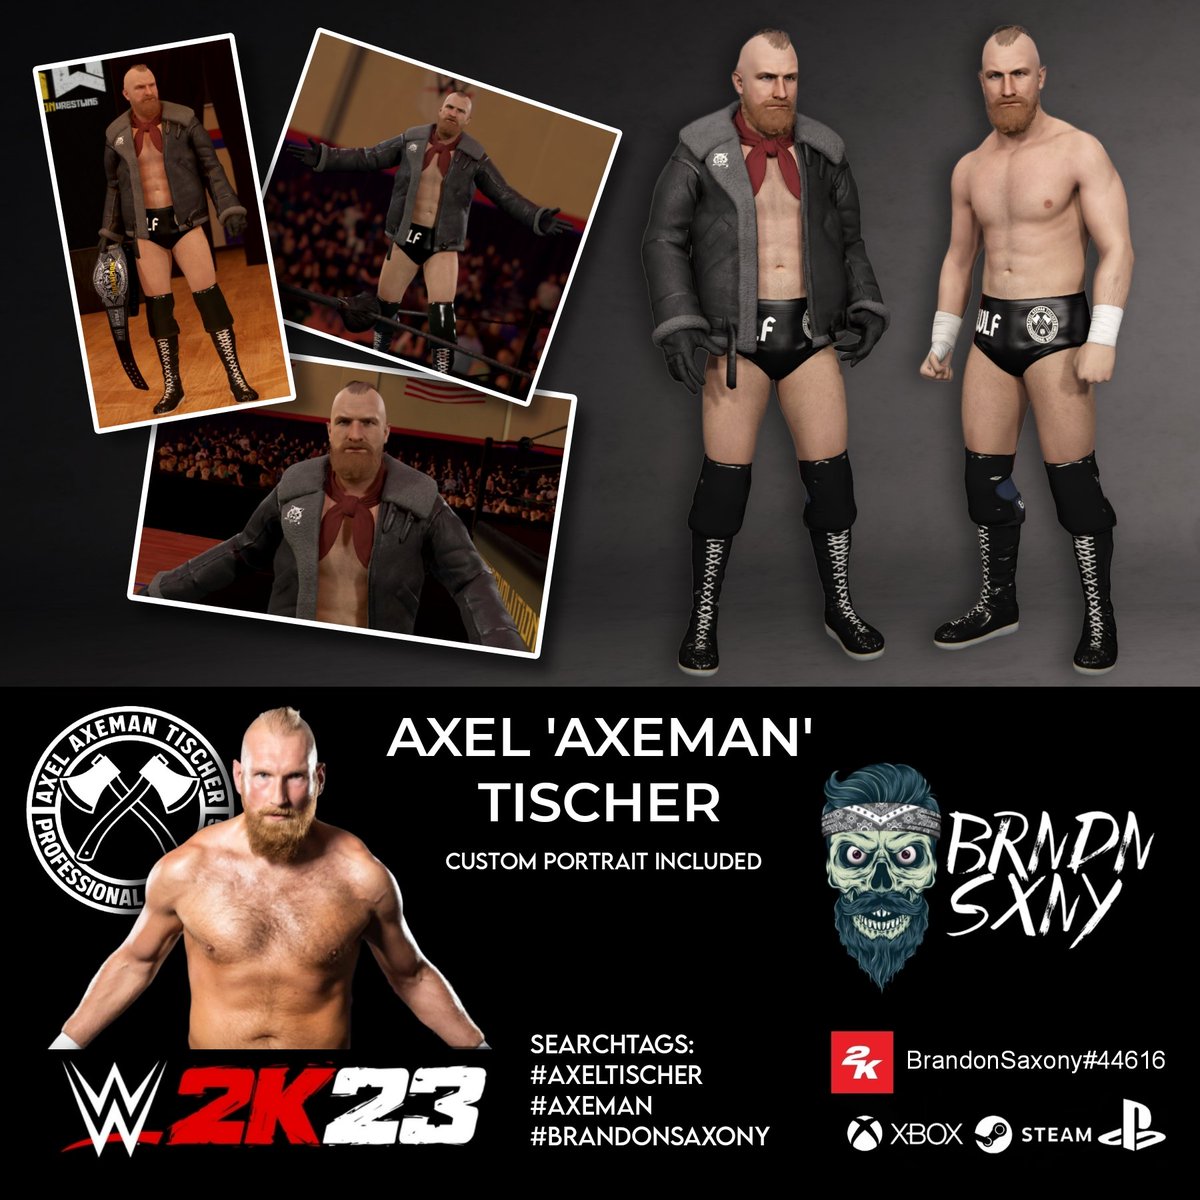 Hey #WWE2K23 Community! The current version of Axel 'Axeman' Tischer (@axeman3016) fka Alexander Wolfe is now available. 
Search tags: #AXELTISCHER, #AXEMAN or #BRANDONSAXONY
Facescan by @Iconic2k, Custom Portrait by @enzoanimal90, Moveset by @The_SkyFactor